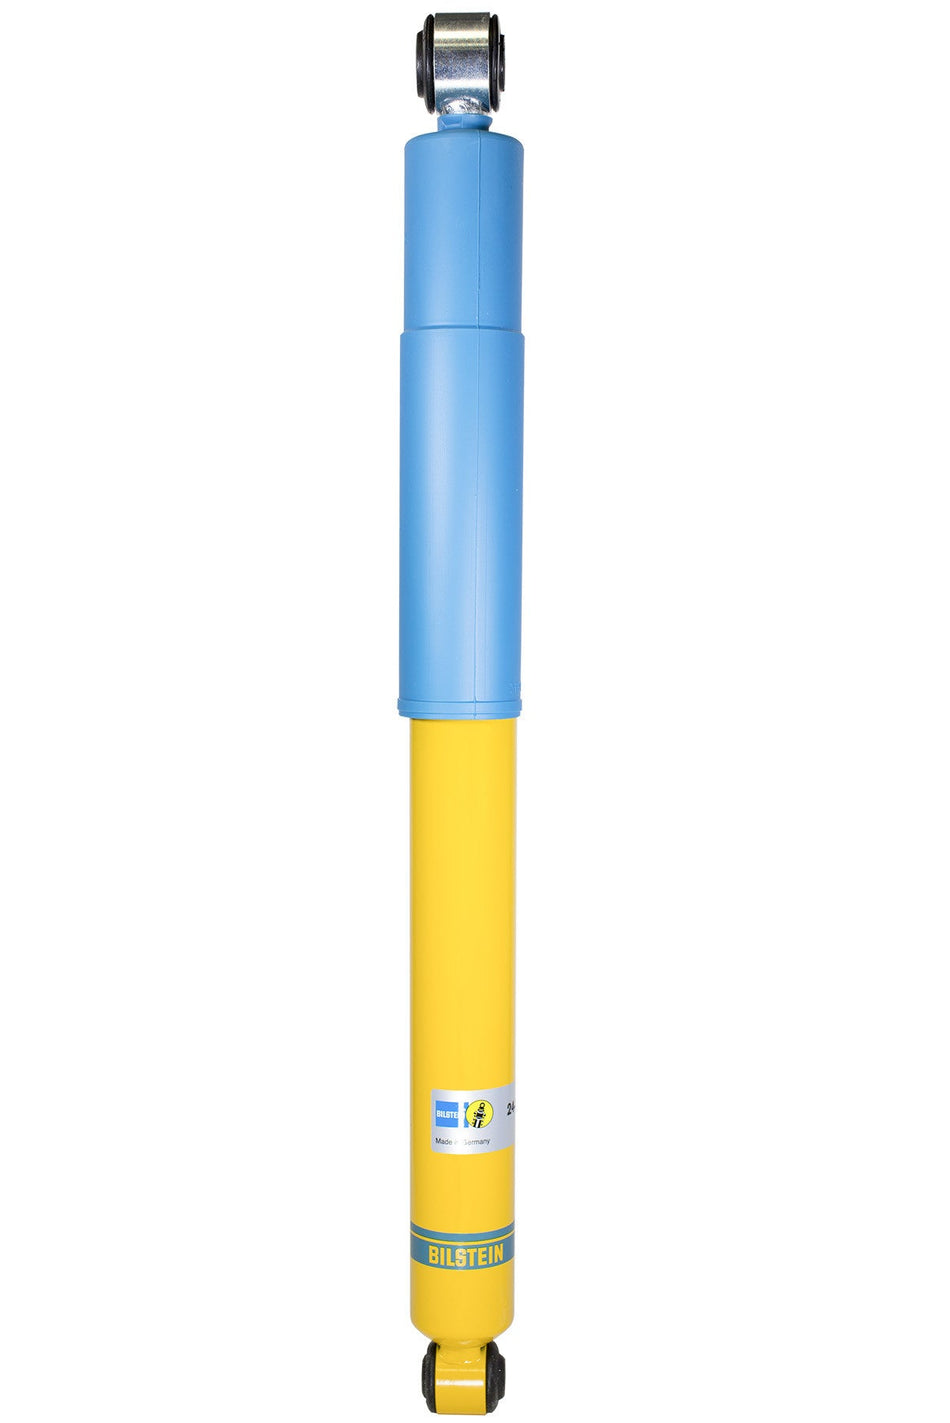 Bilstein Front B6 Shock for Land Rover 90/110 (1984-2001) / Discovery 1 (1989-1995) / Range Rover (1969-1994) (Comfort)